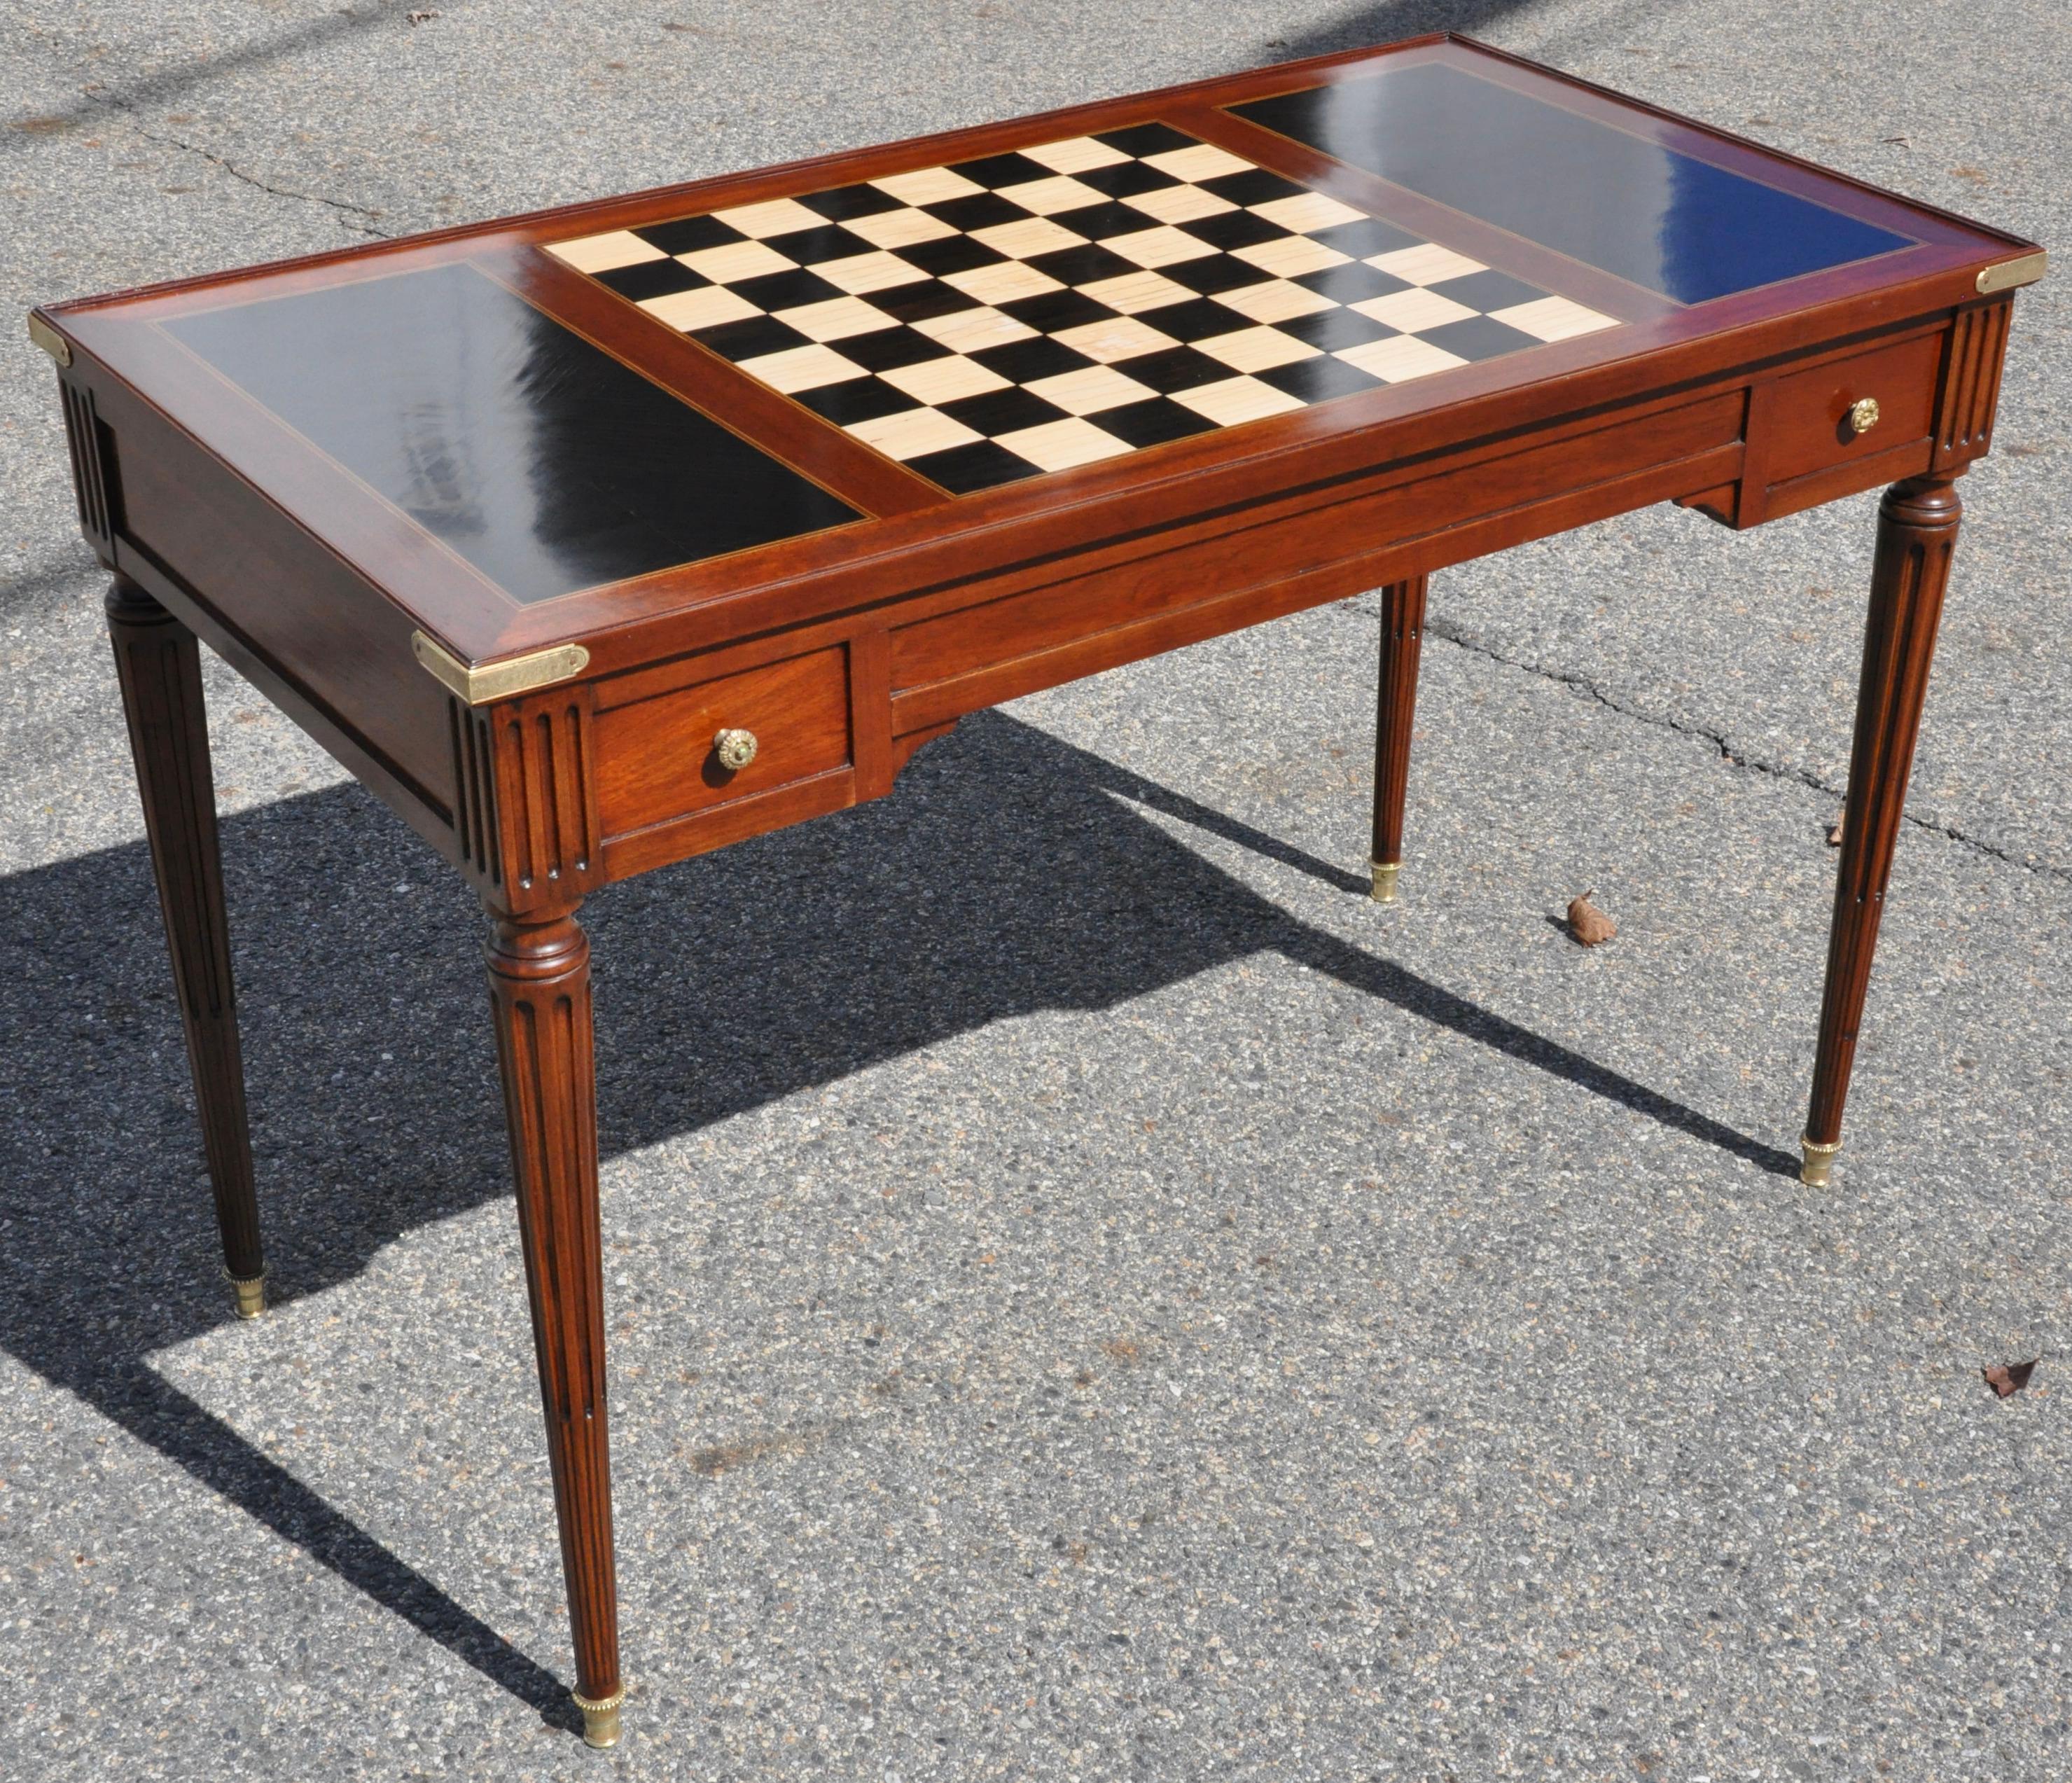 Early 19th century French mahogany Tric Trac or backgammon game table. Mahogany and ebony case with ebony and bone inlaid backgammon well. Exquisite top with bone and ebony chess or checkerboard. Reverse of top is leather covered for use as a